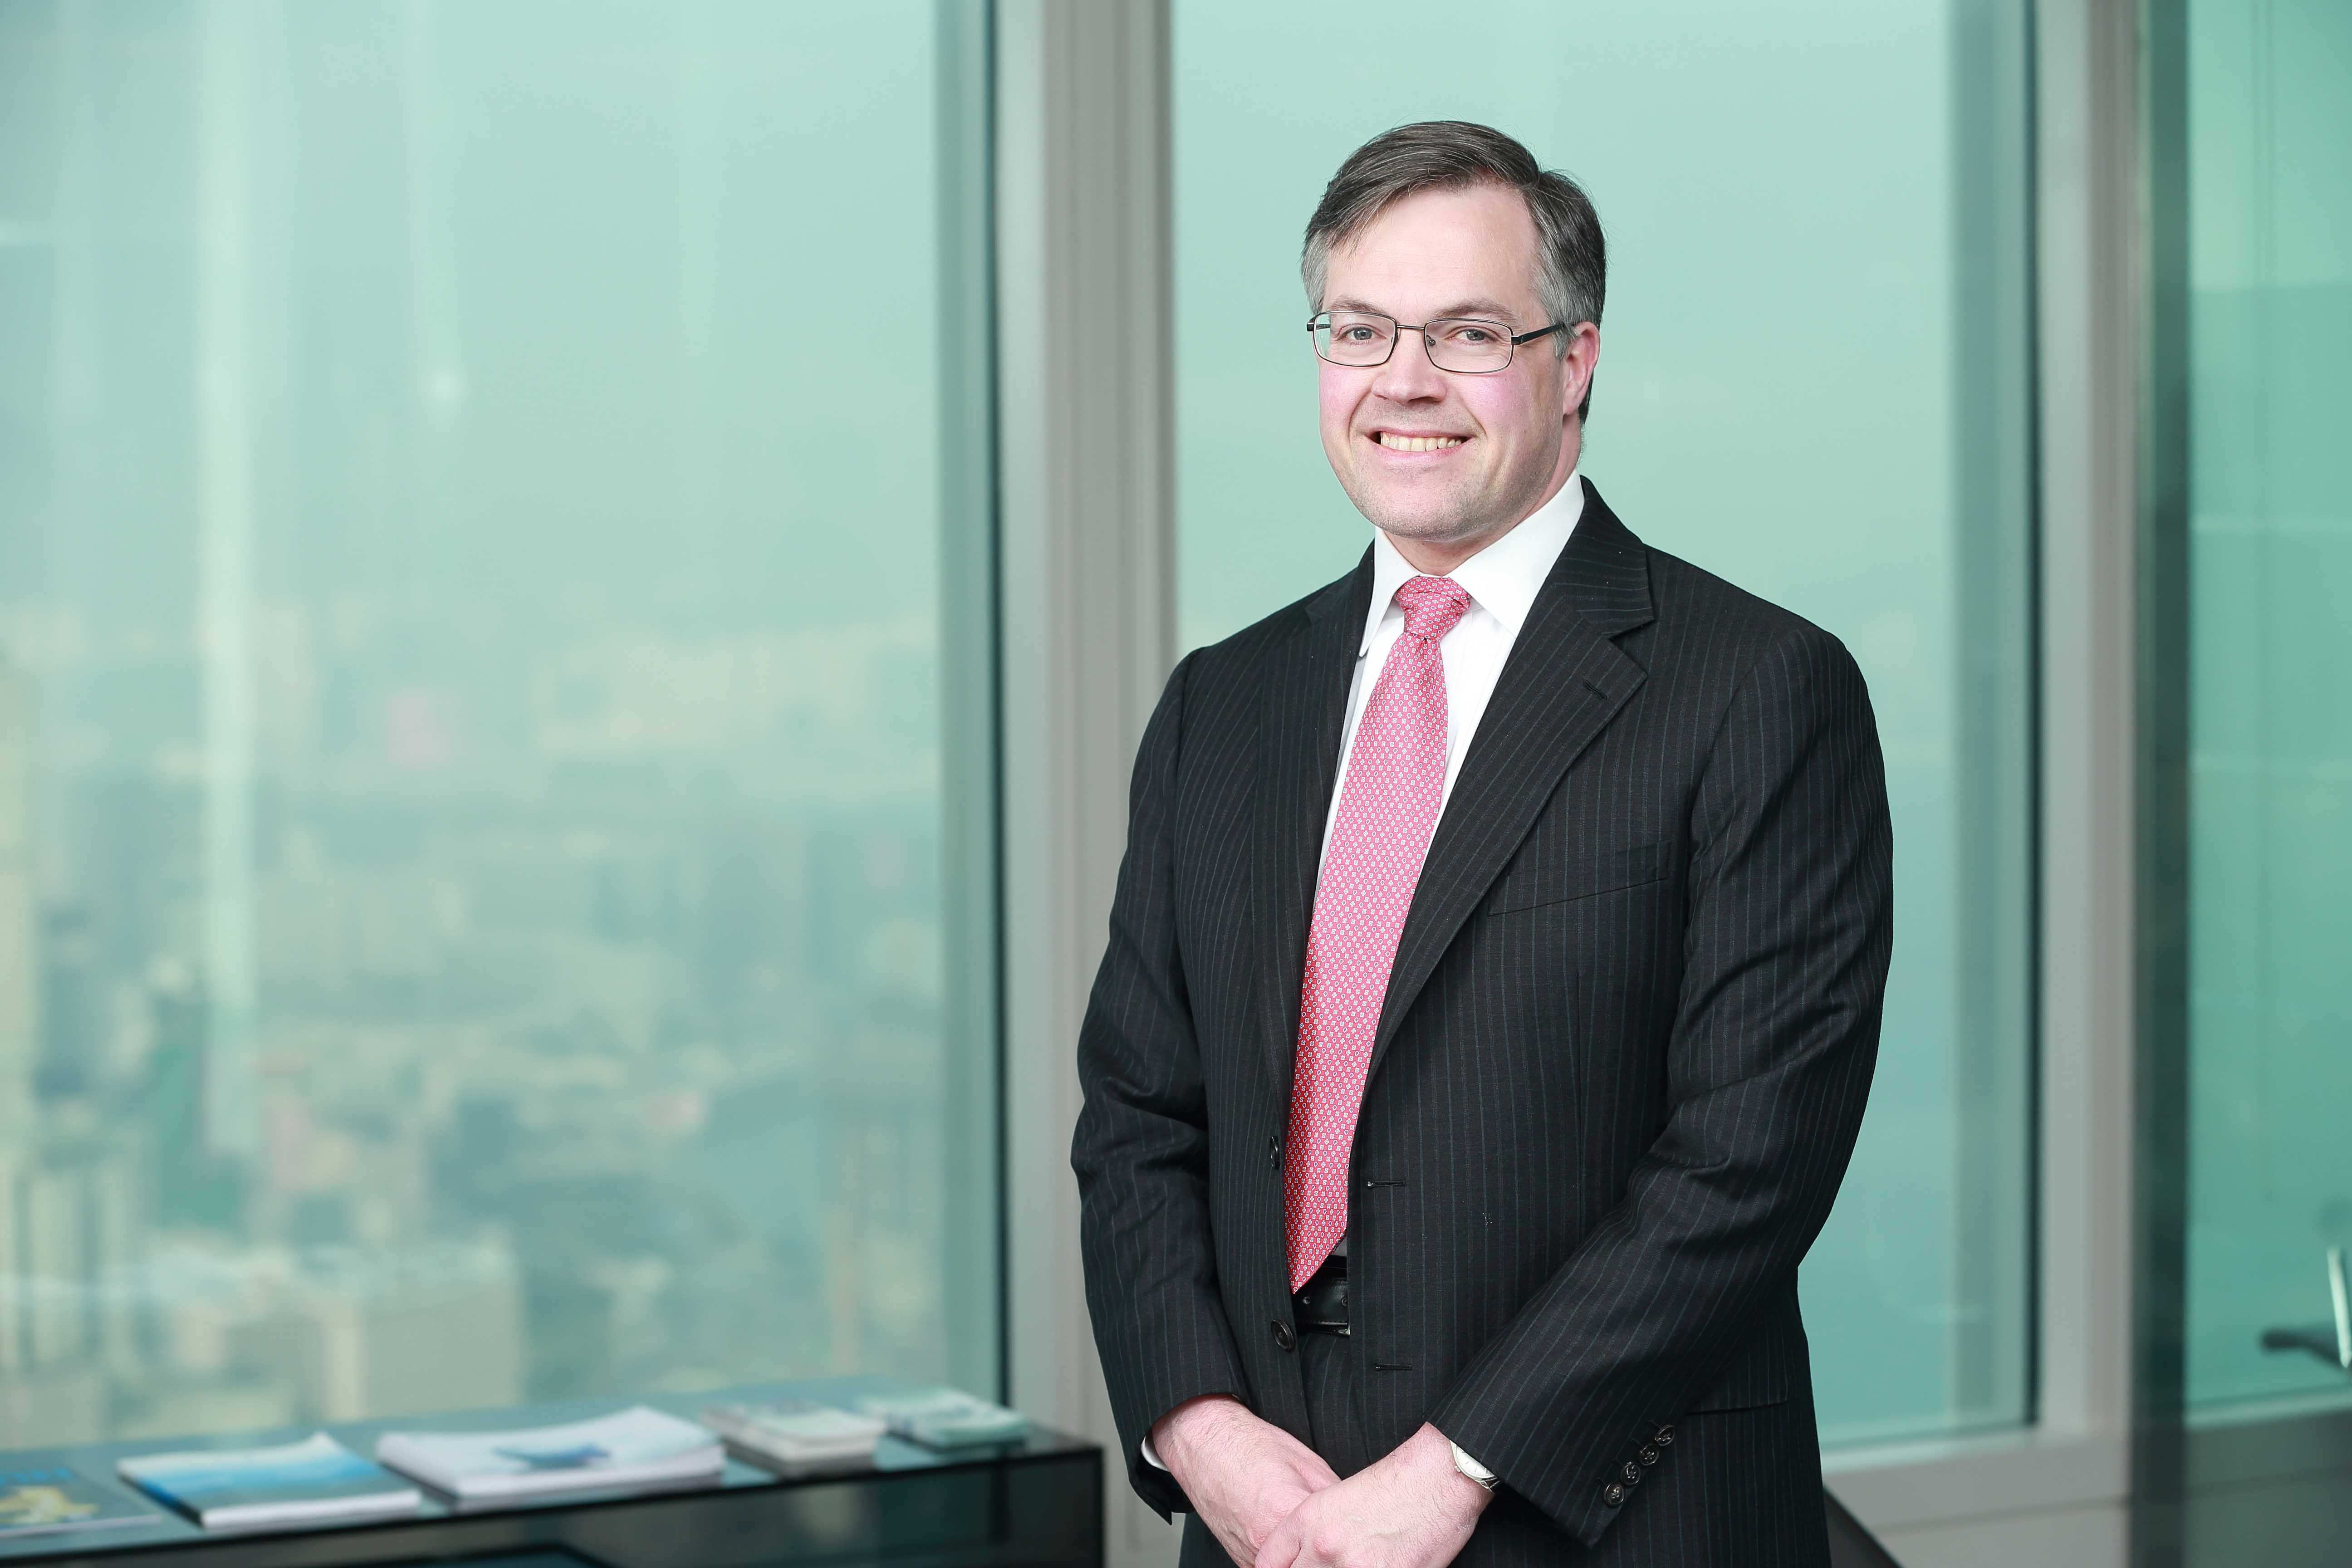 Kevin Anderson is head of investments, Asia-Pacific, for State Street Global Advisors.